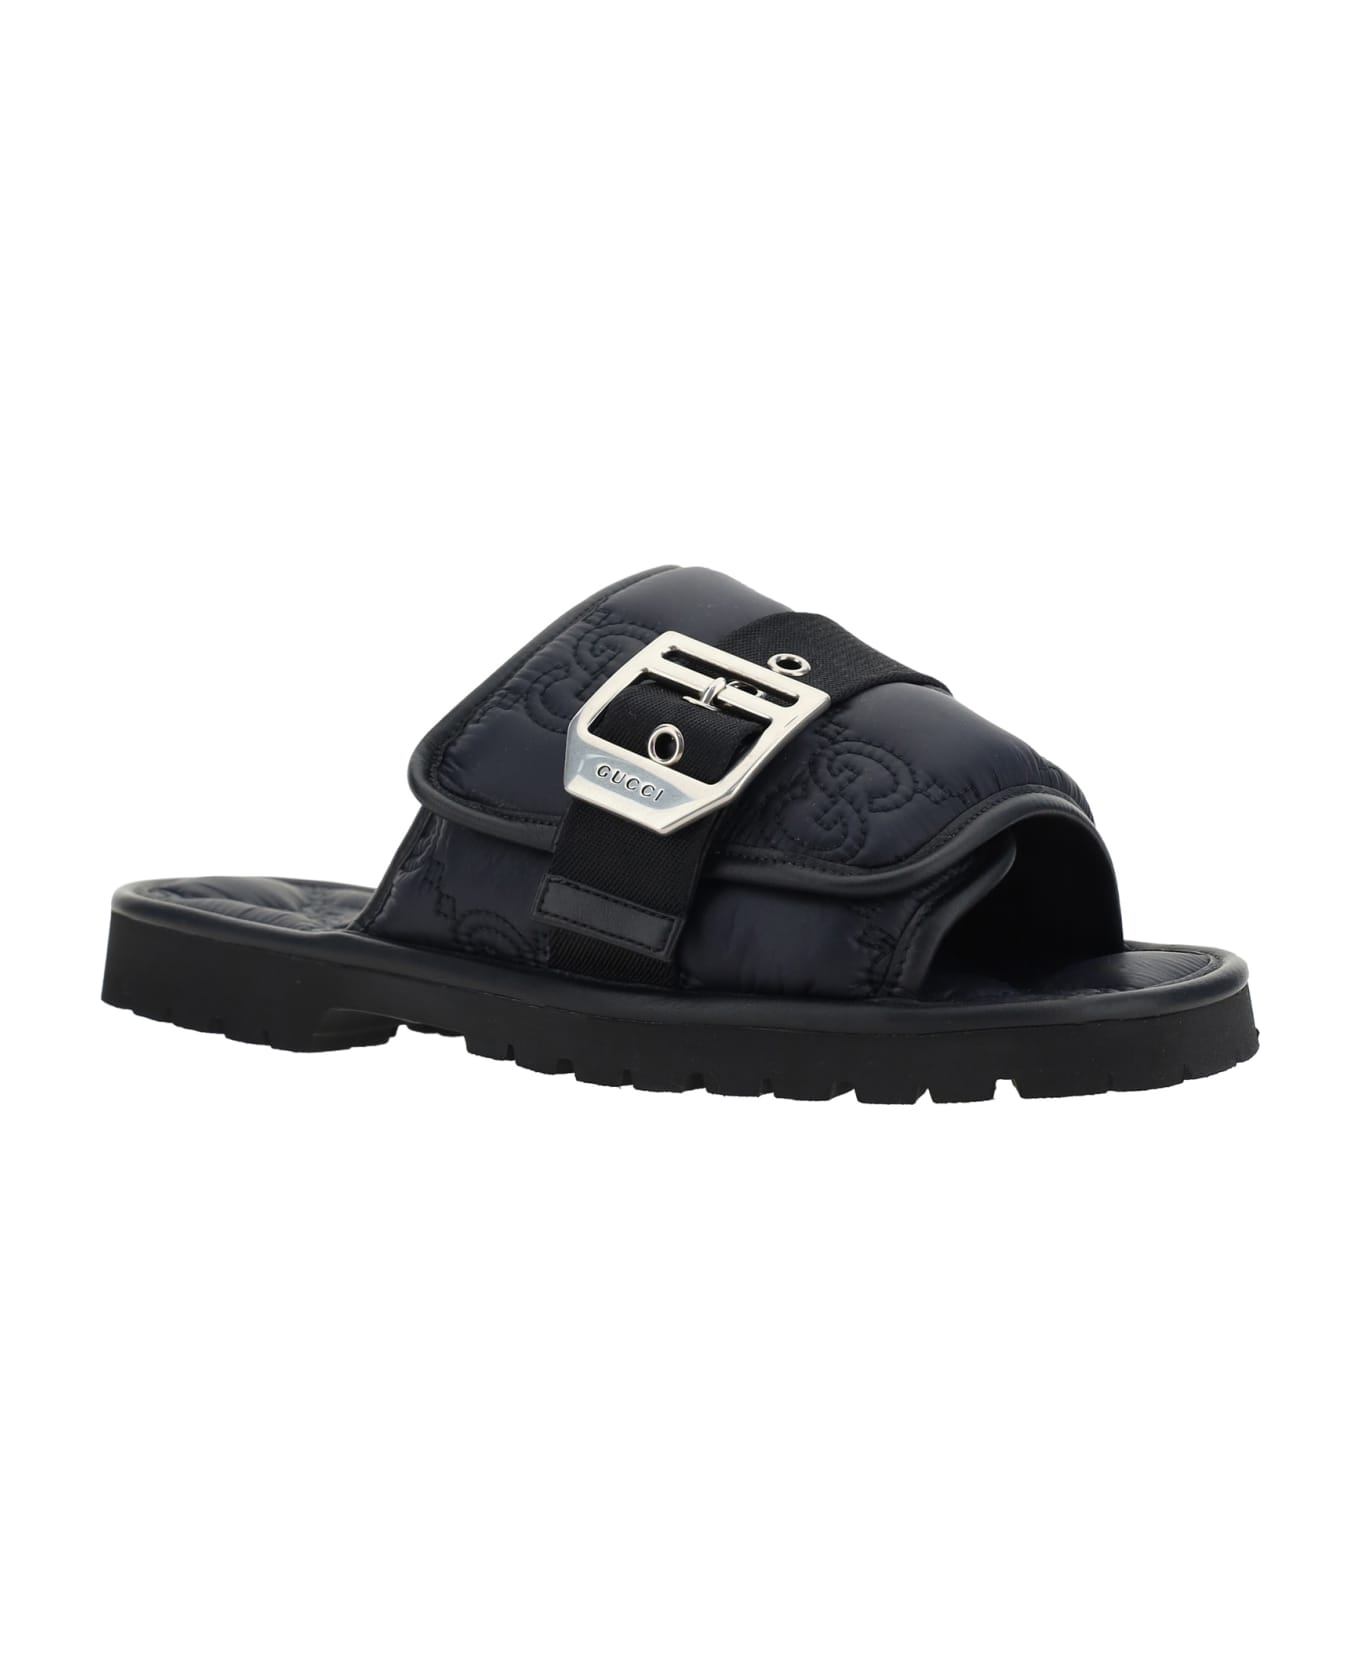 Gucci Gg Sandals - Nero その他各種シューズ